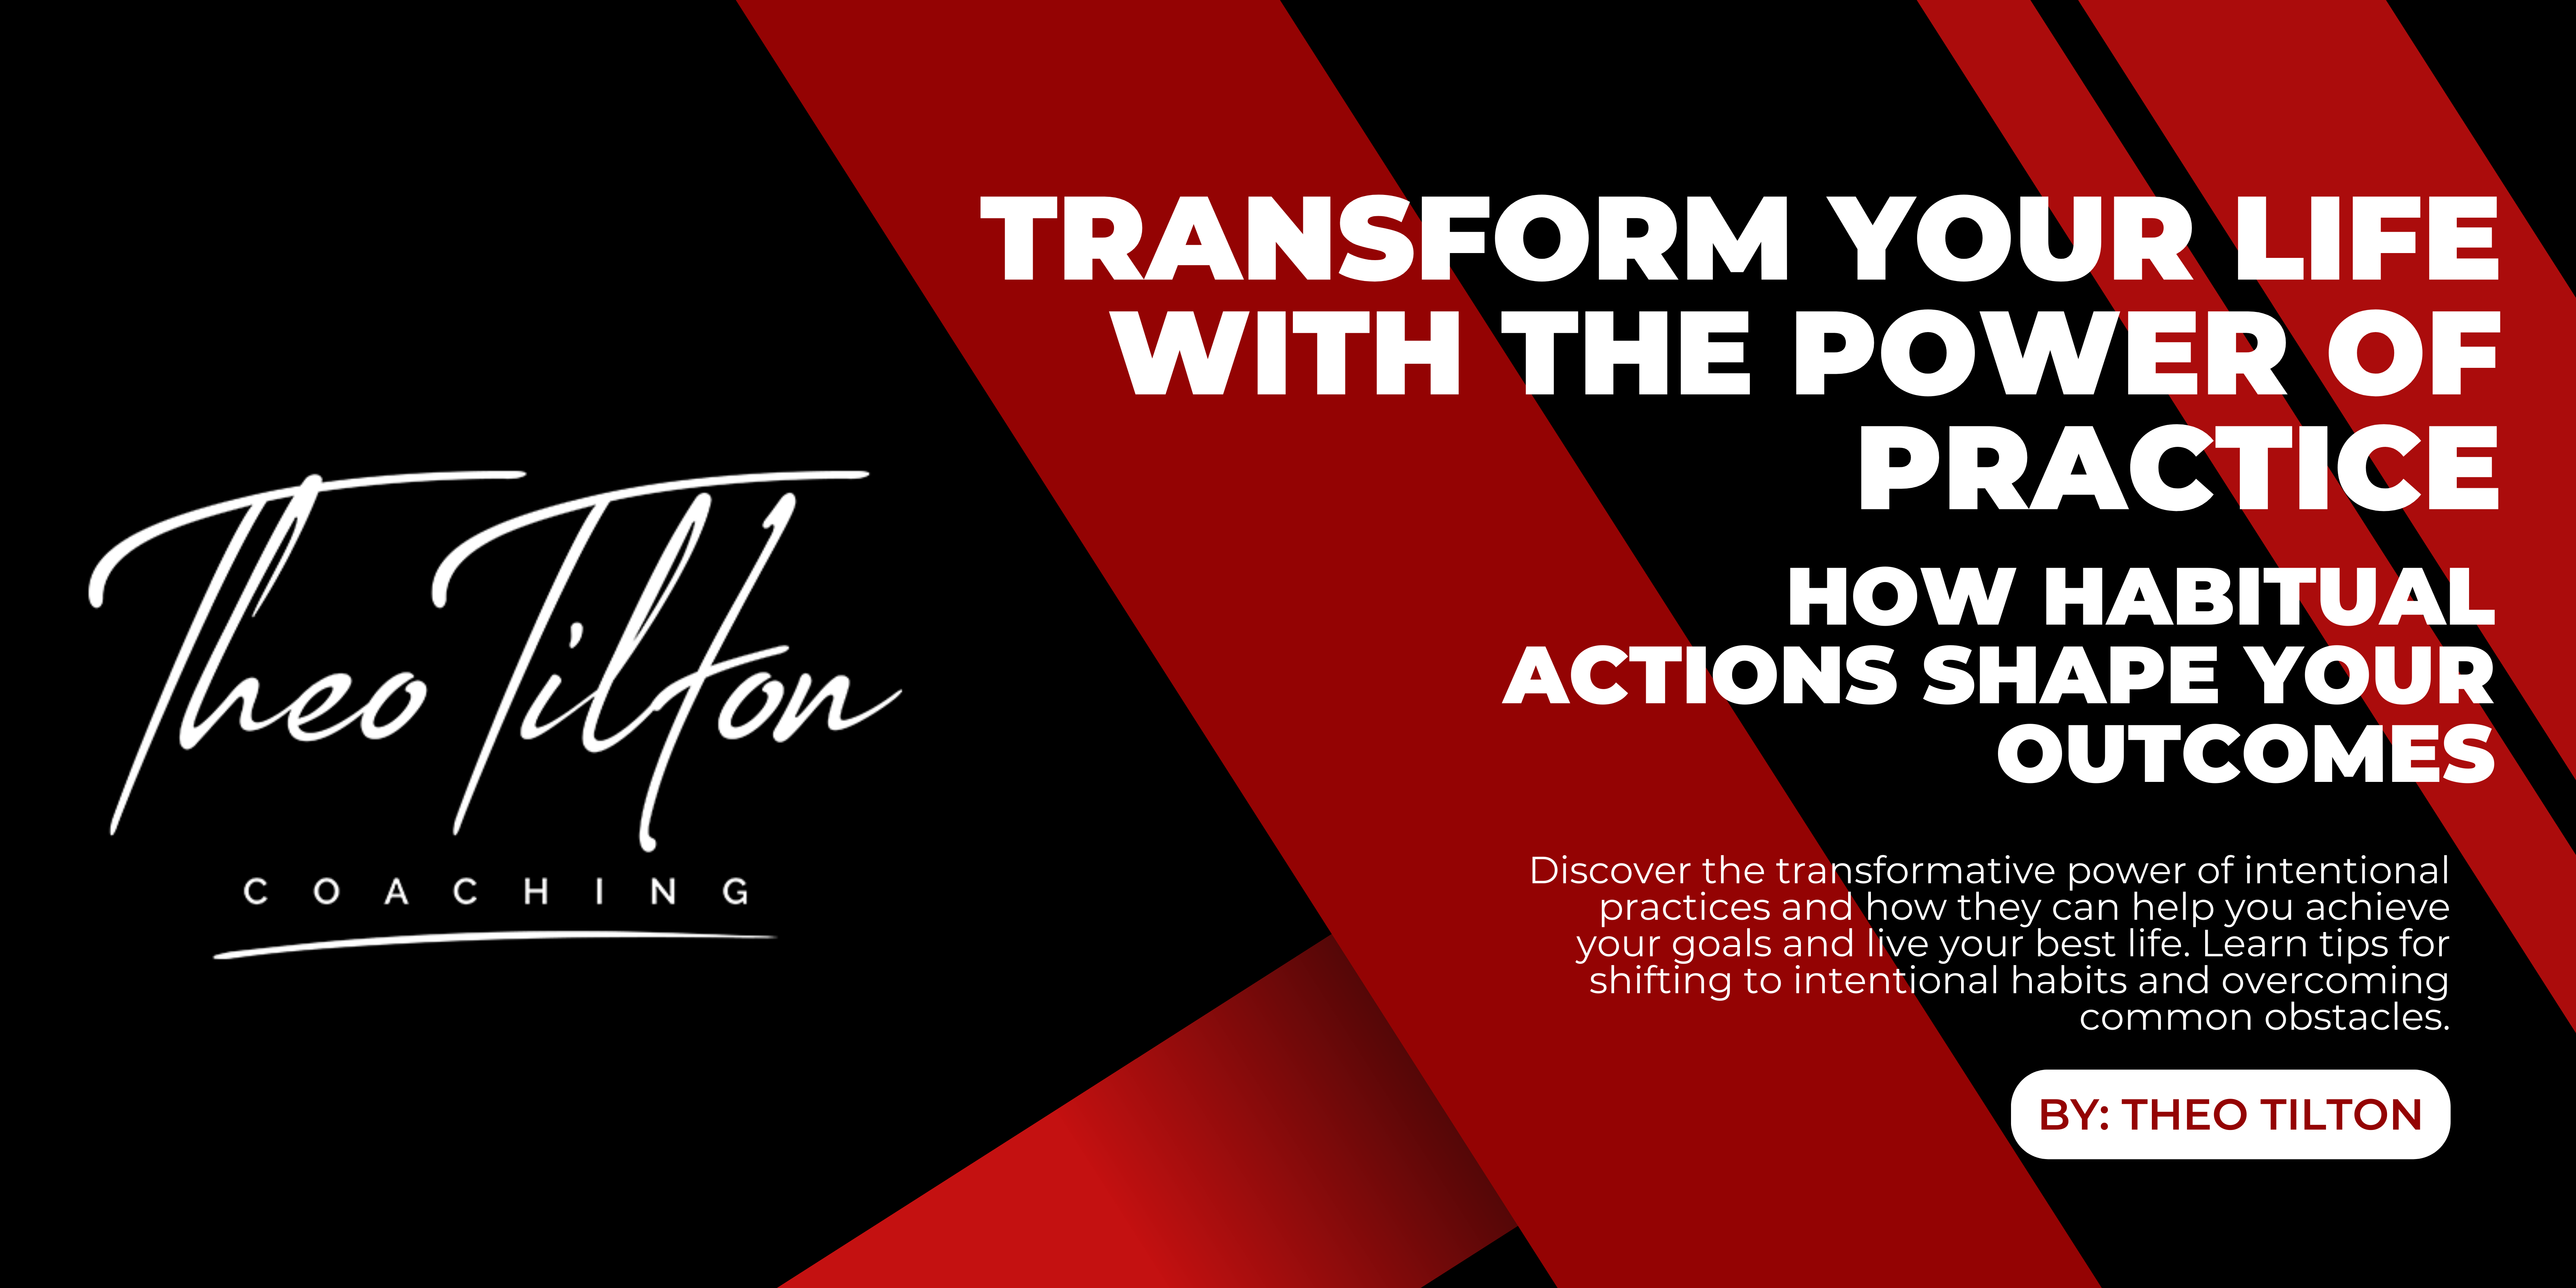 Transform Your Life with the Power of Practice: How Habitual Actions Shape Your Outcomes.